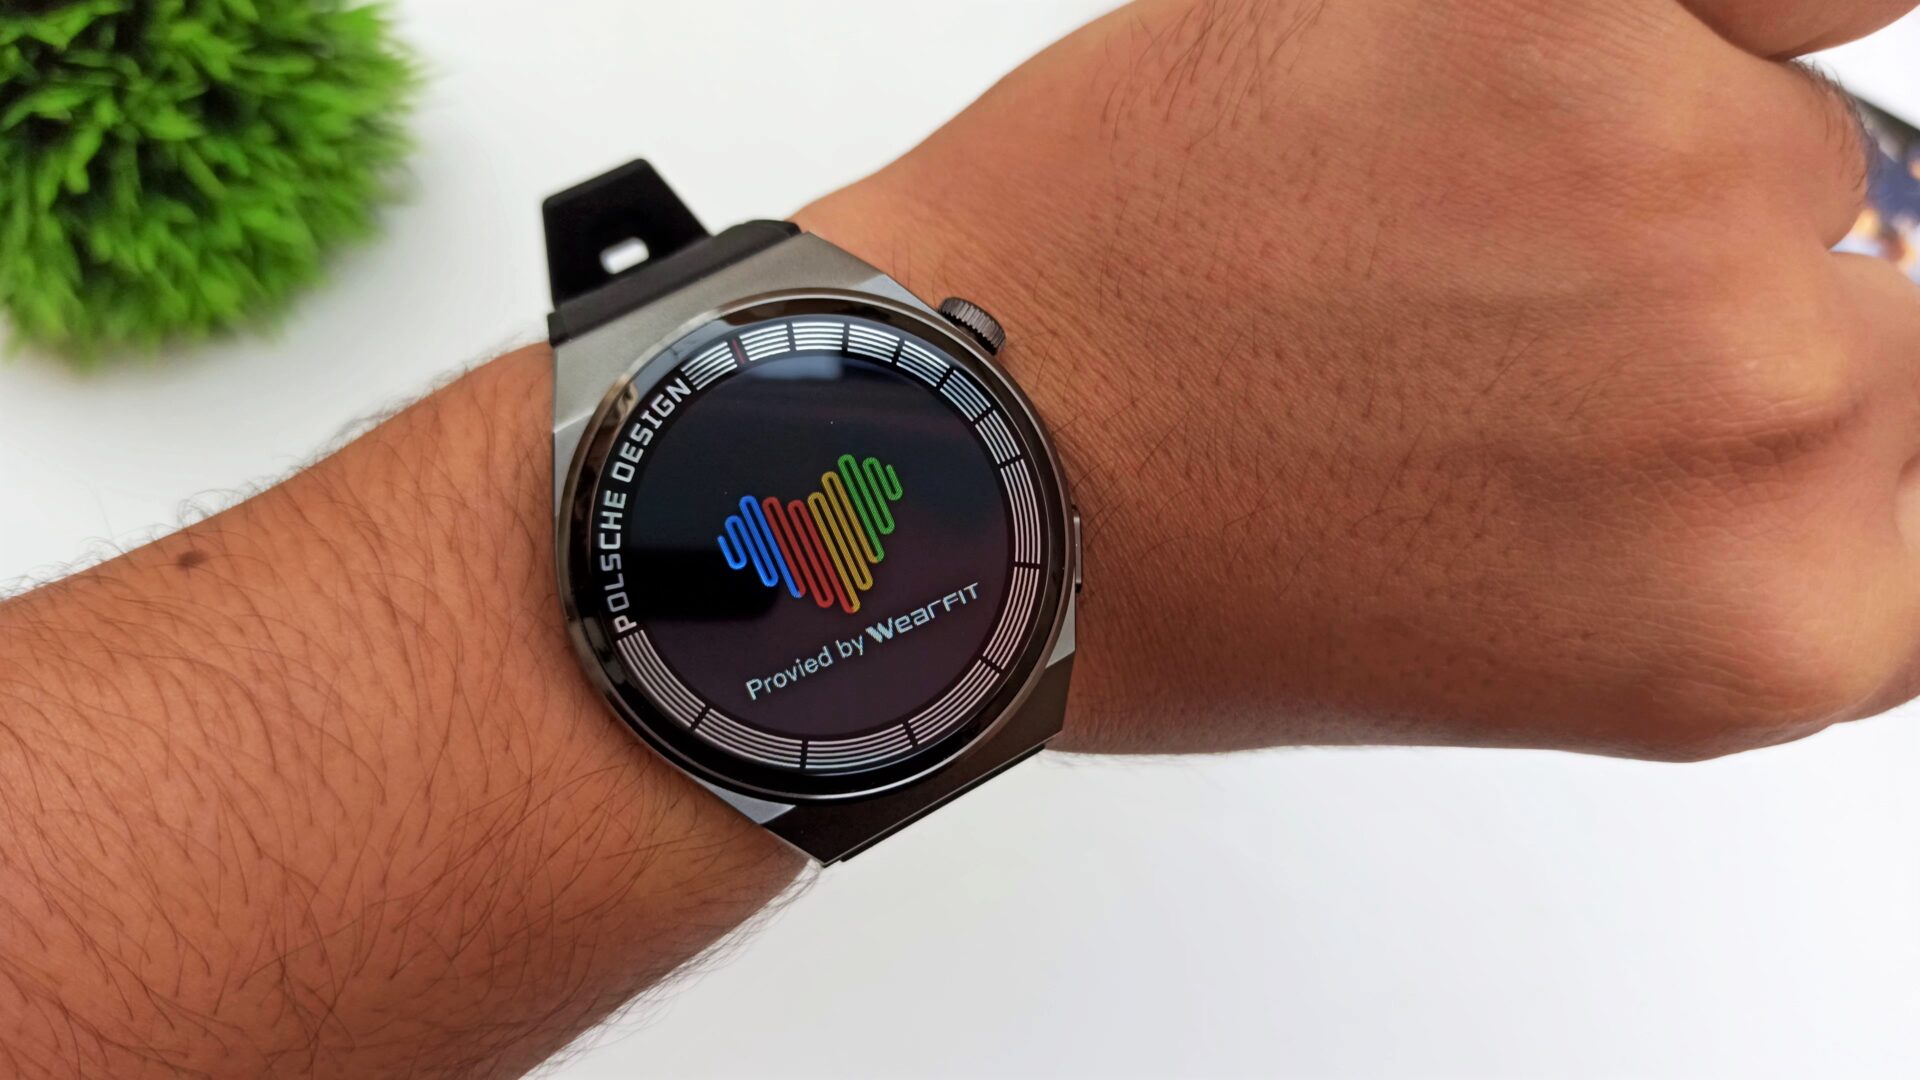 HW3 Max Smartwatch Review